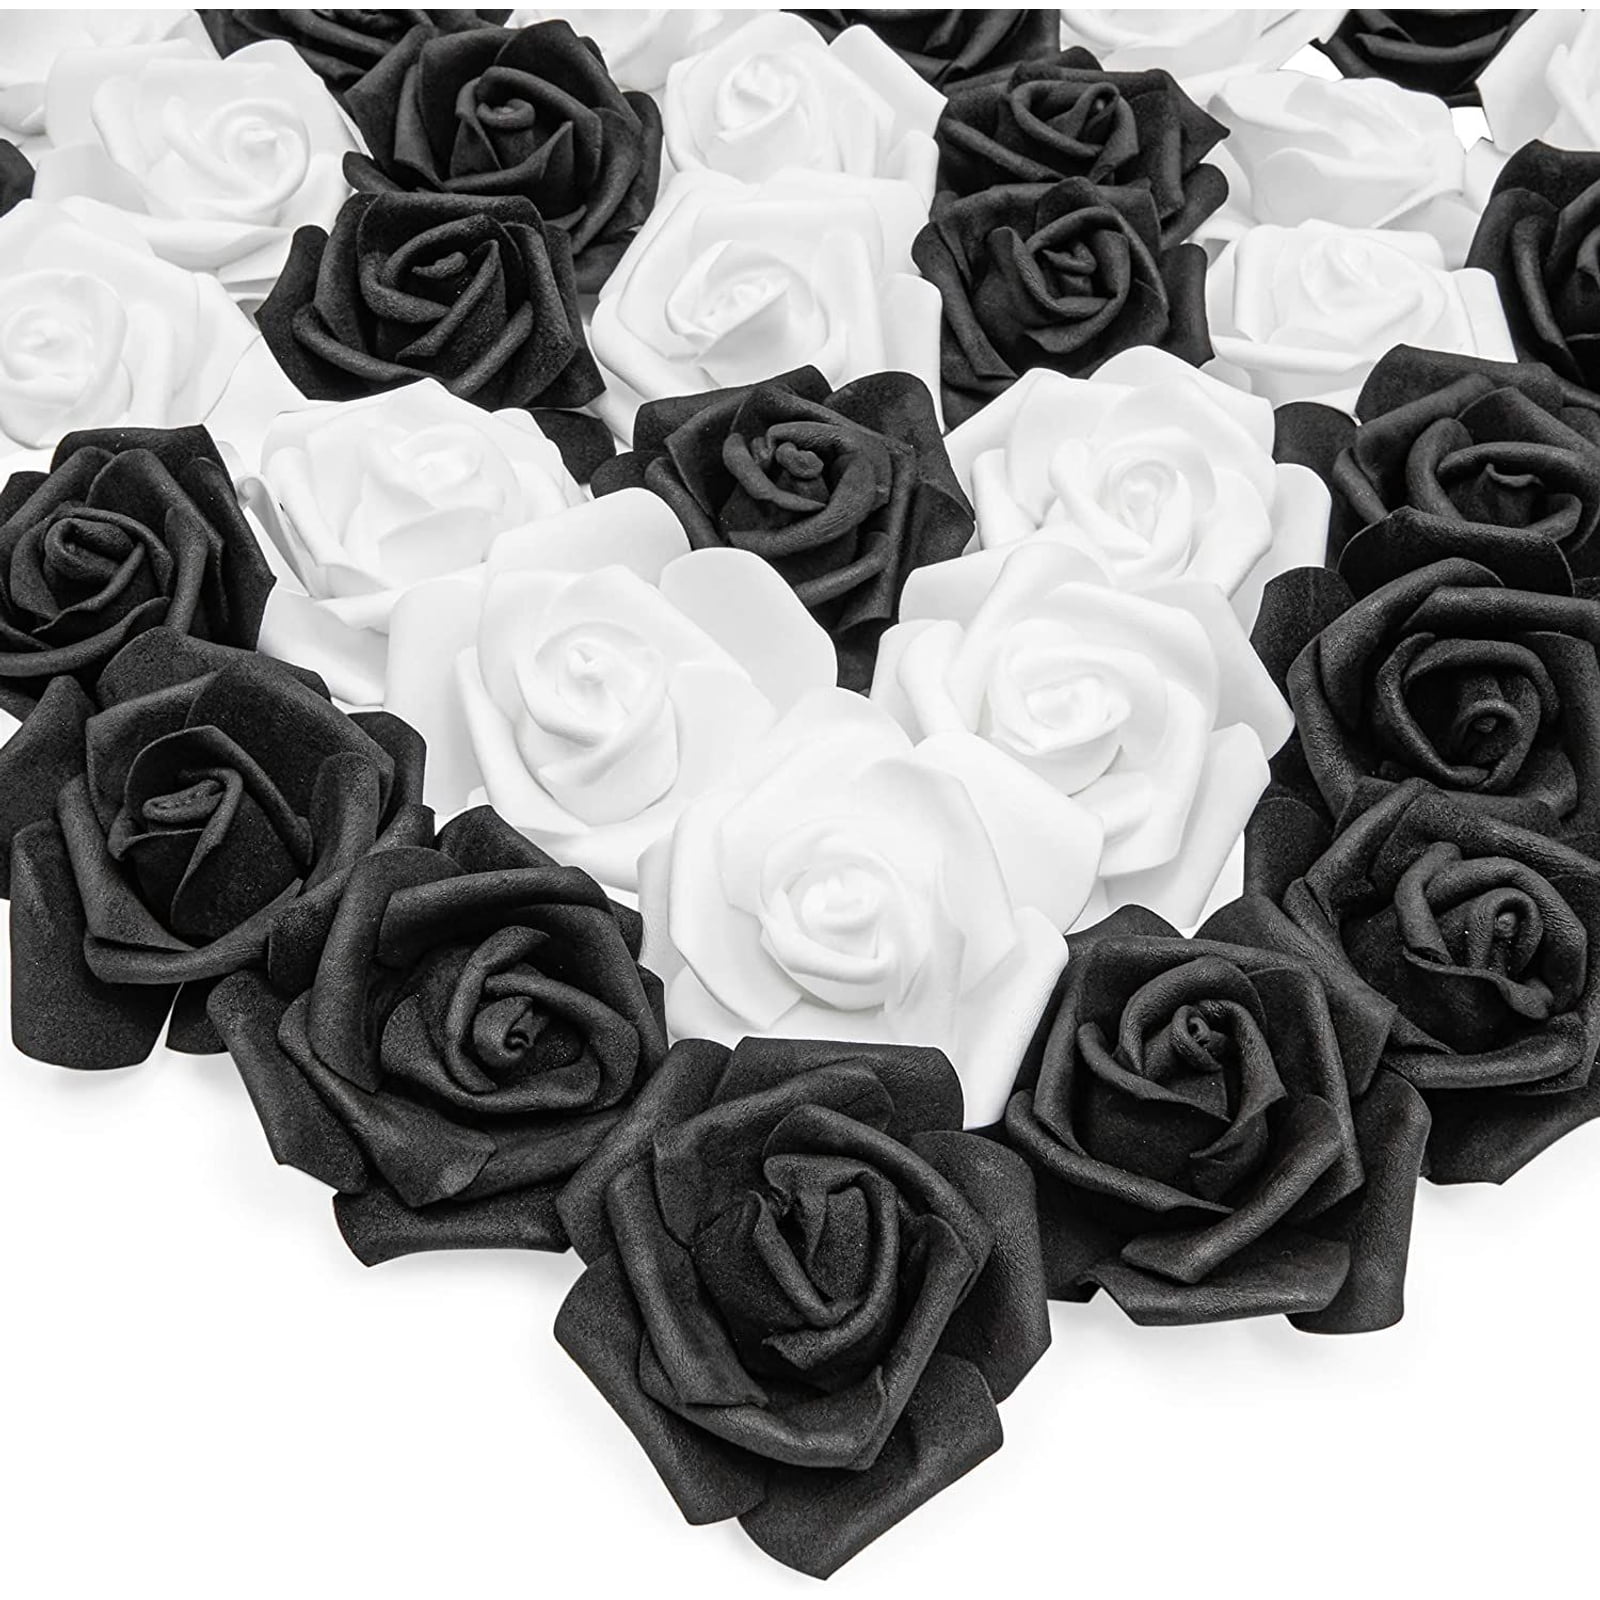 12 pcs Black CRAFT 2.5" wide OPEN ROSES Wedding Party Flowers Supplies Wholesale